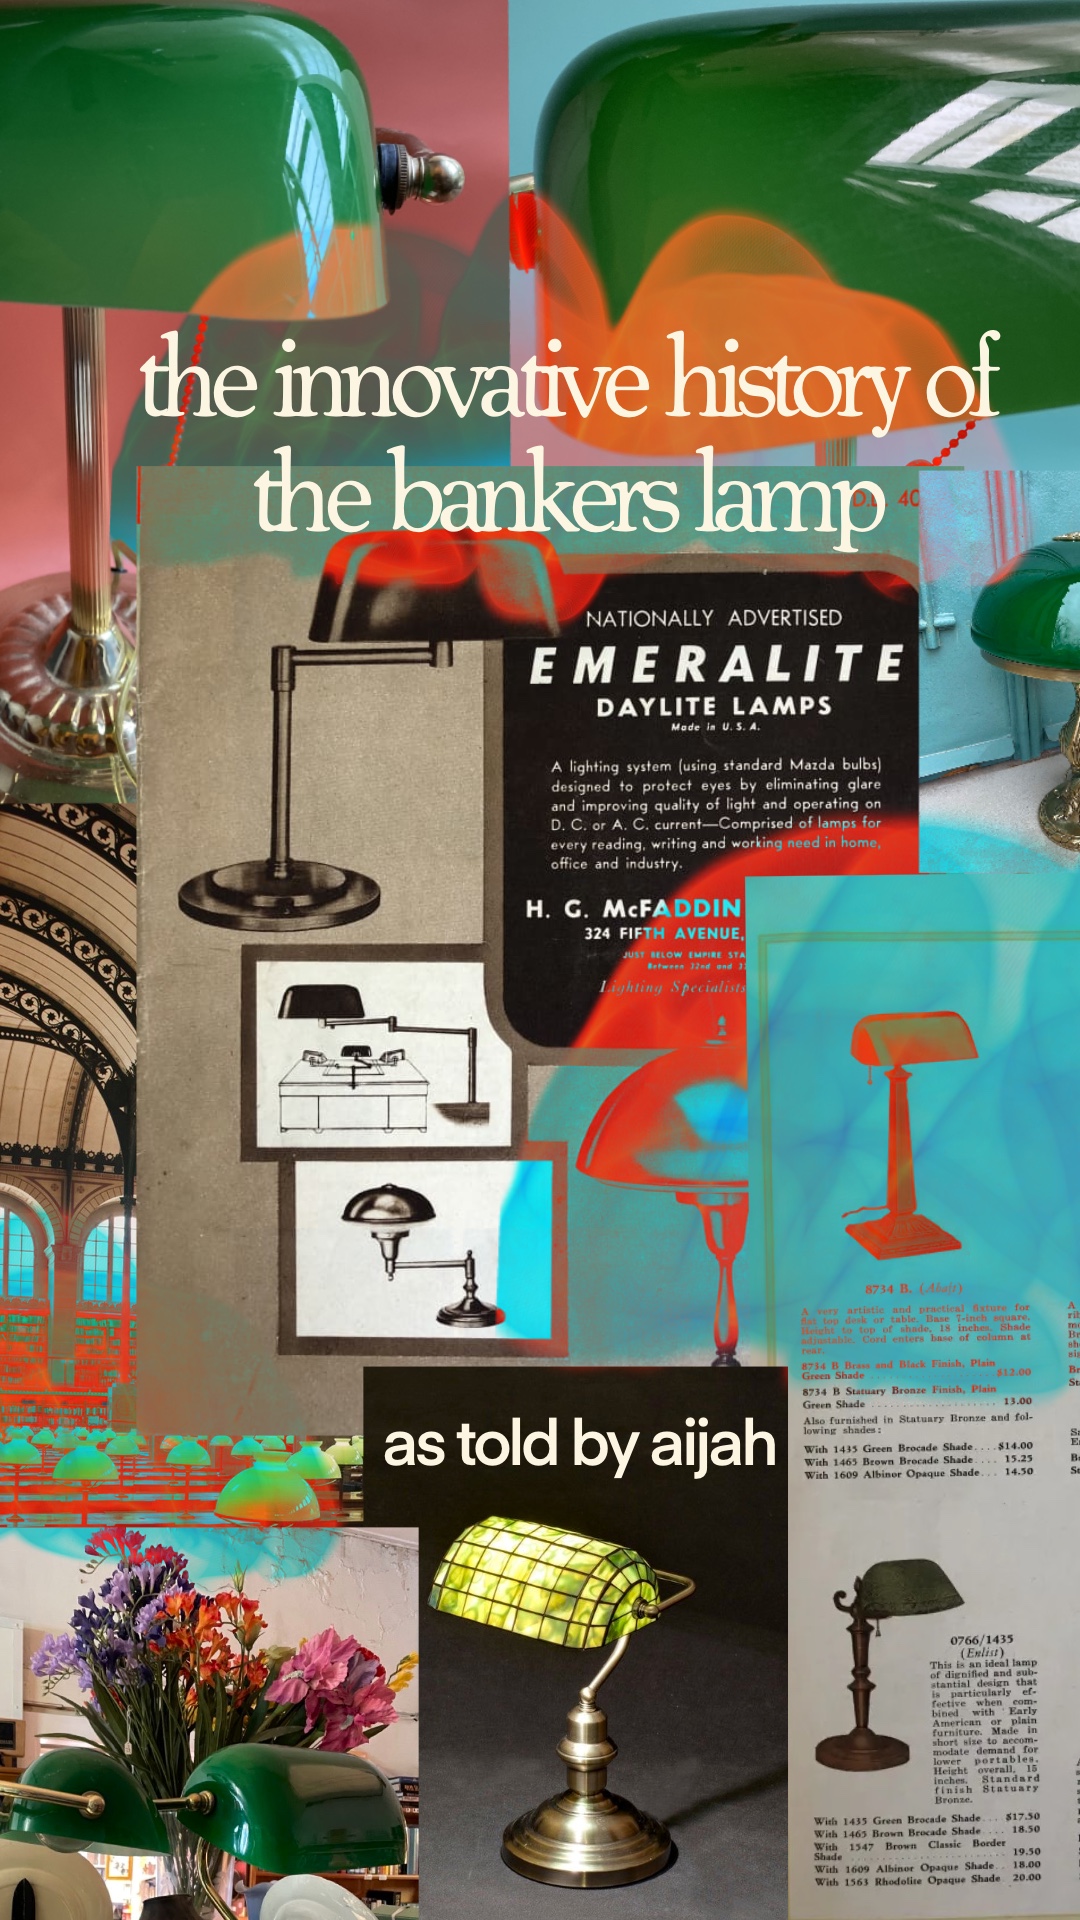 the innovative history of the bankers lamp